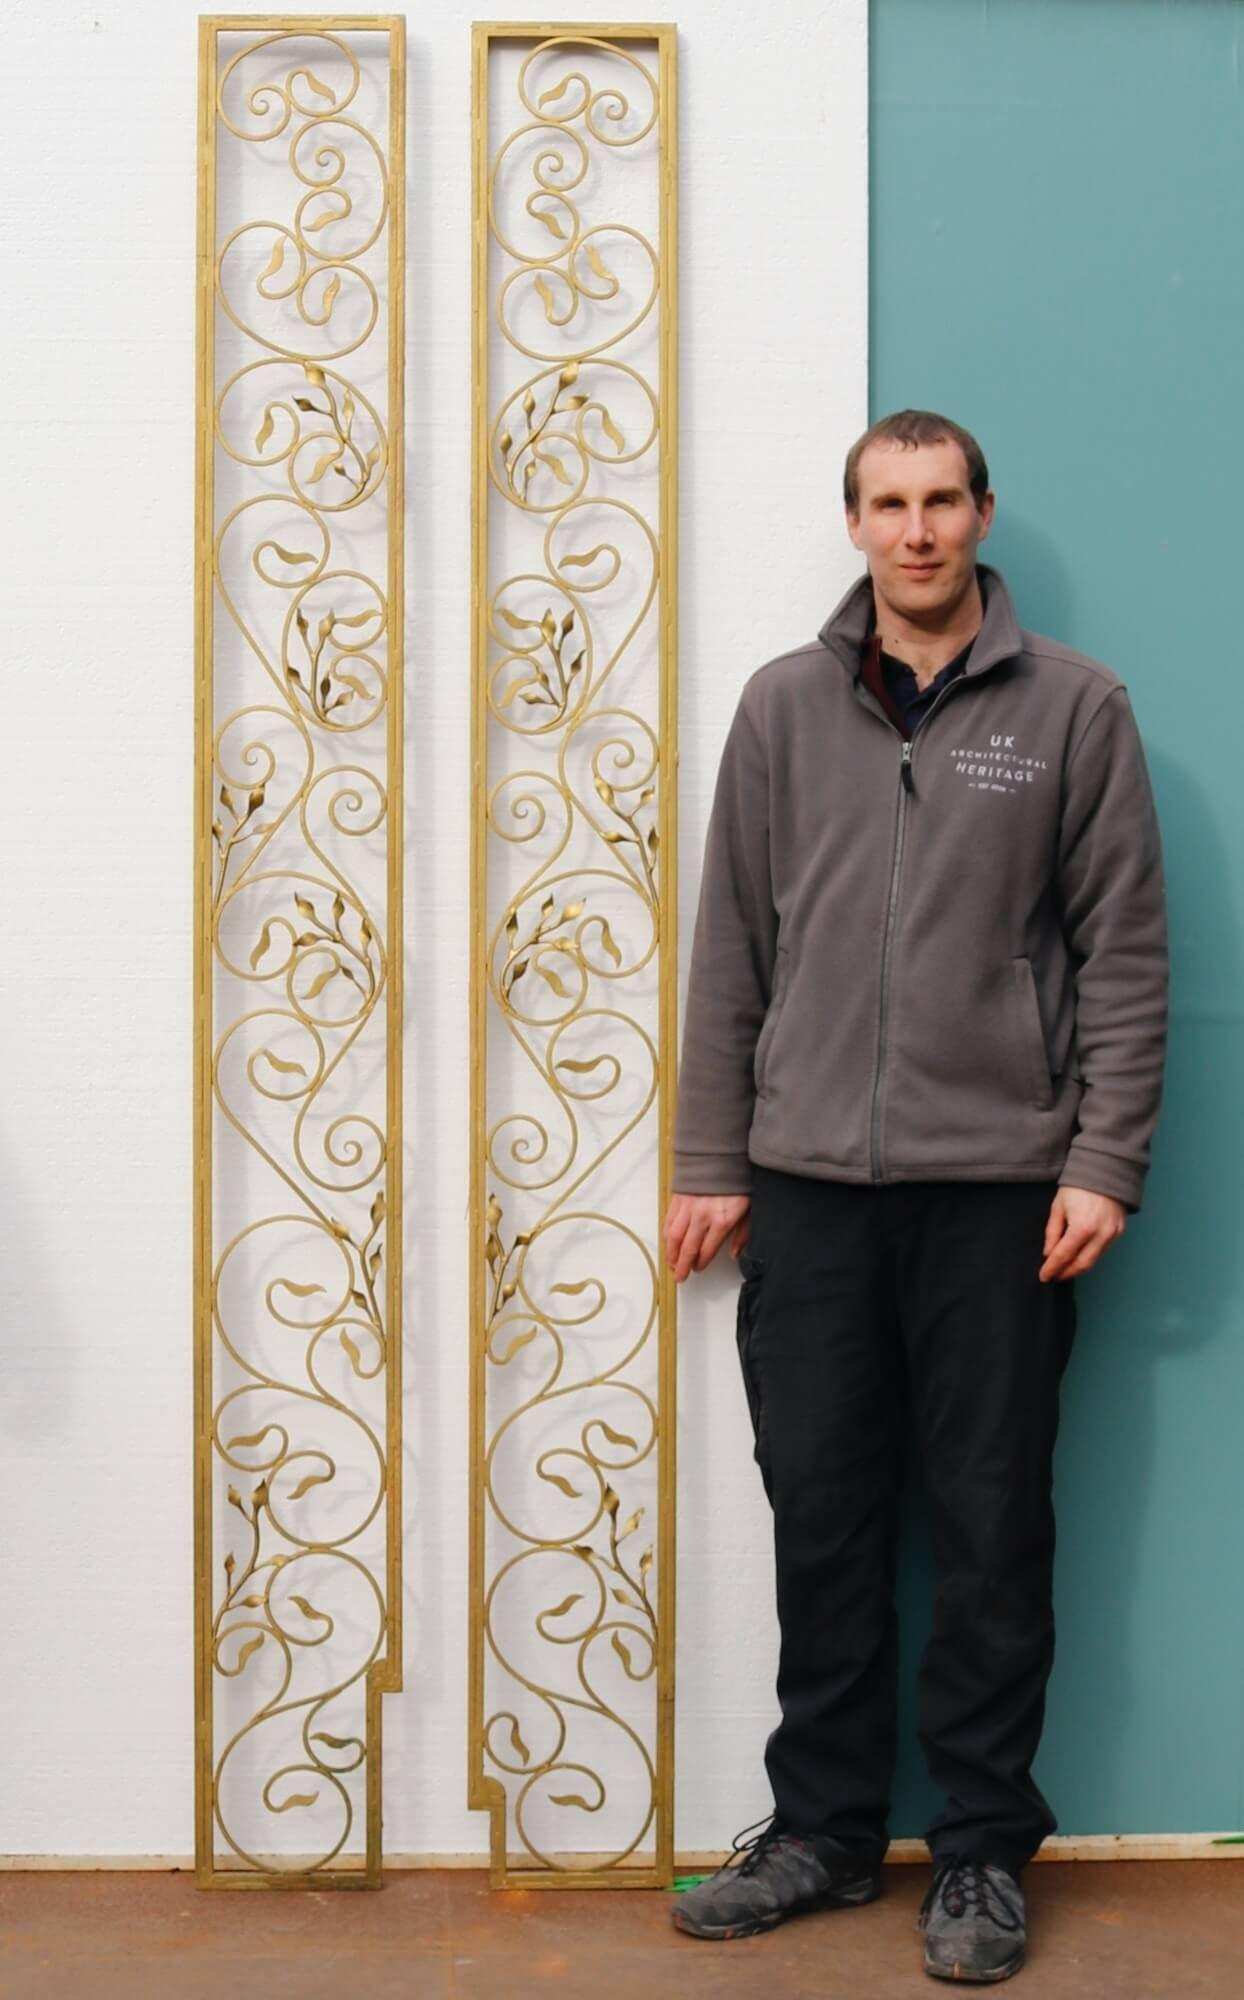 With their painted gold finish and ornate design, this pair of tall Hollywood Regency style decorative wrought iron panels make a beautiful feature in a garden. Dating from the mid 20th century, each decorative garden panel is beautifully